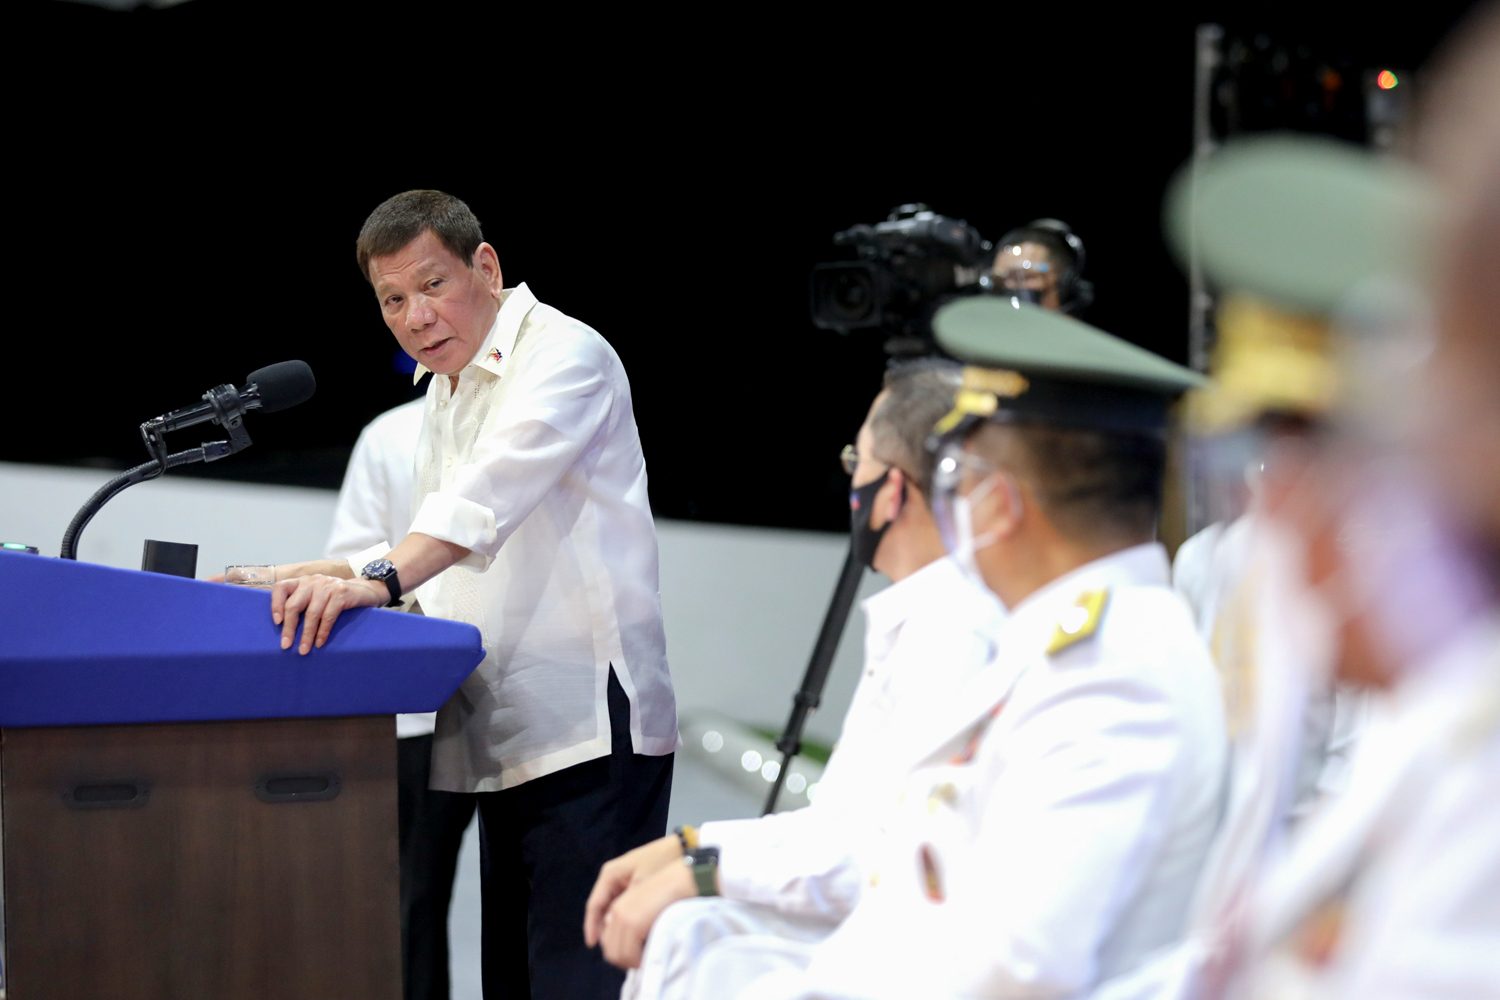 AFP, DND deny ‘fake news’ on troops withdrawing support from Duterte